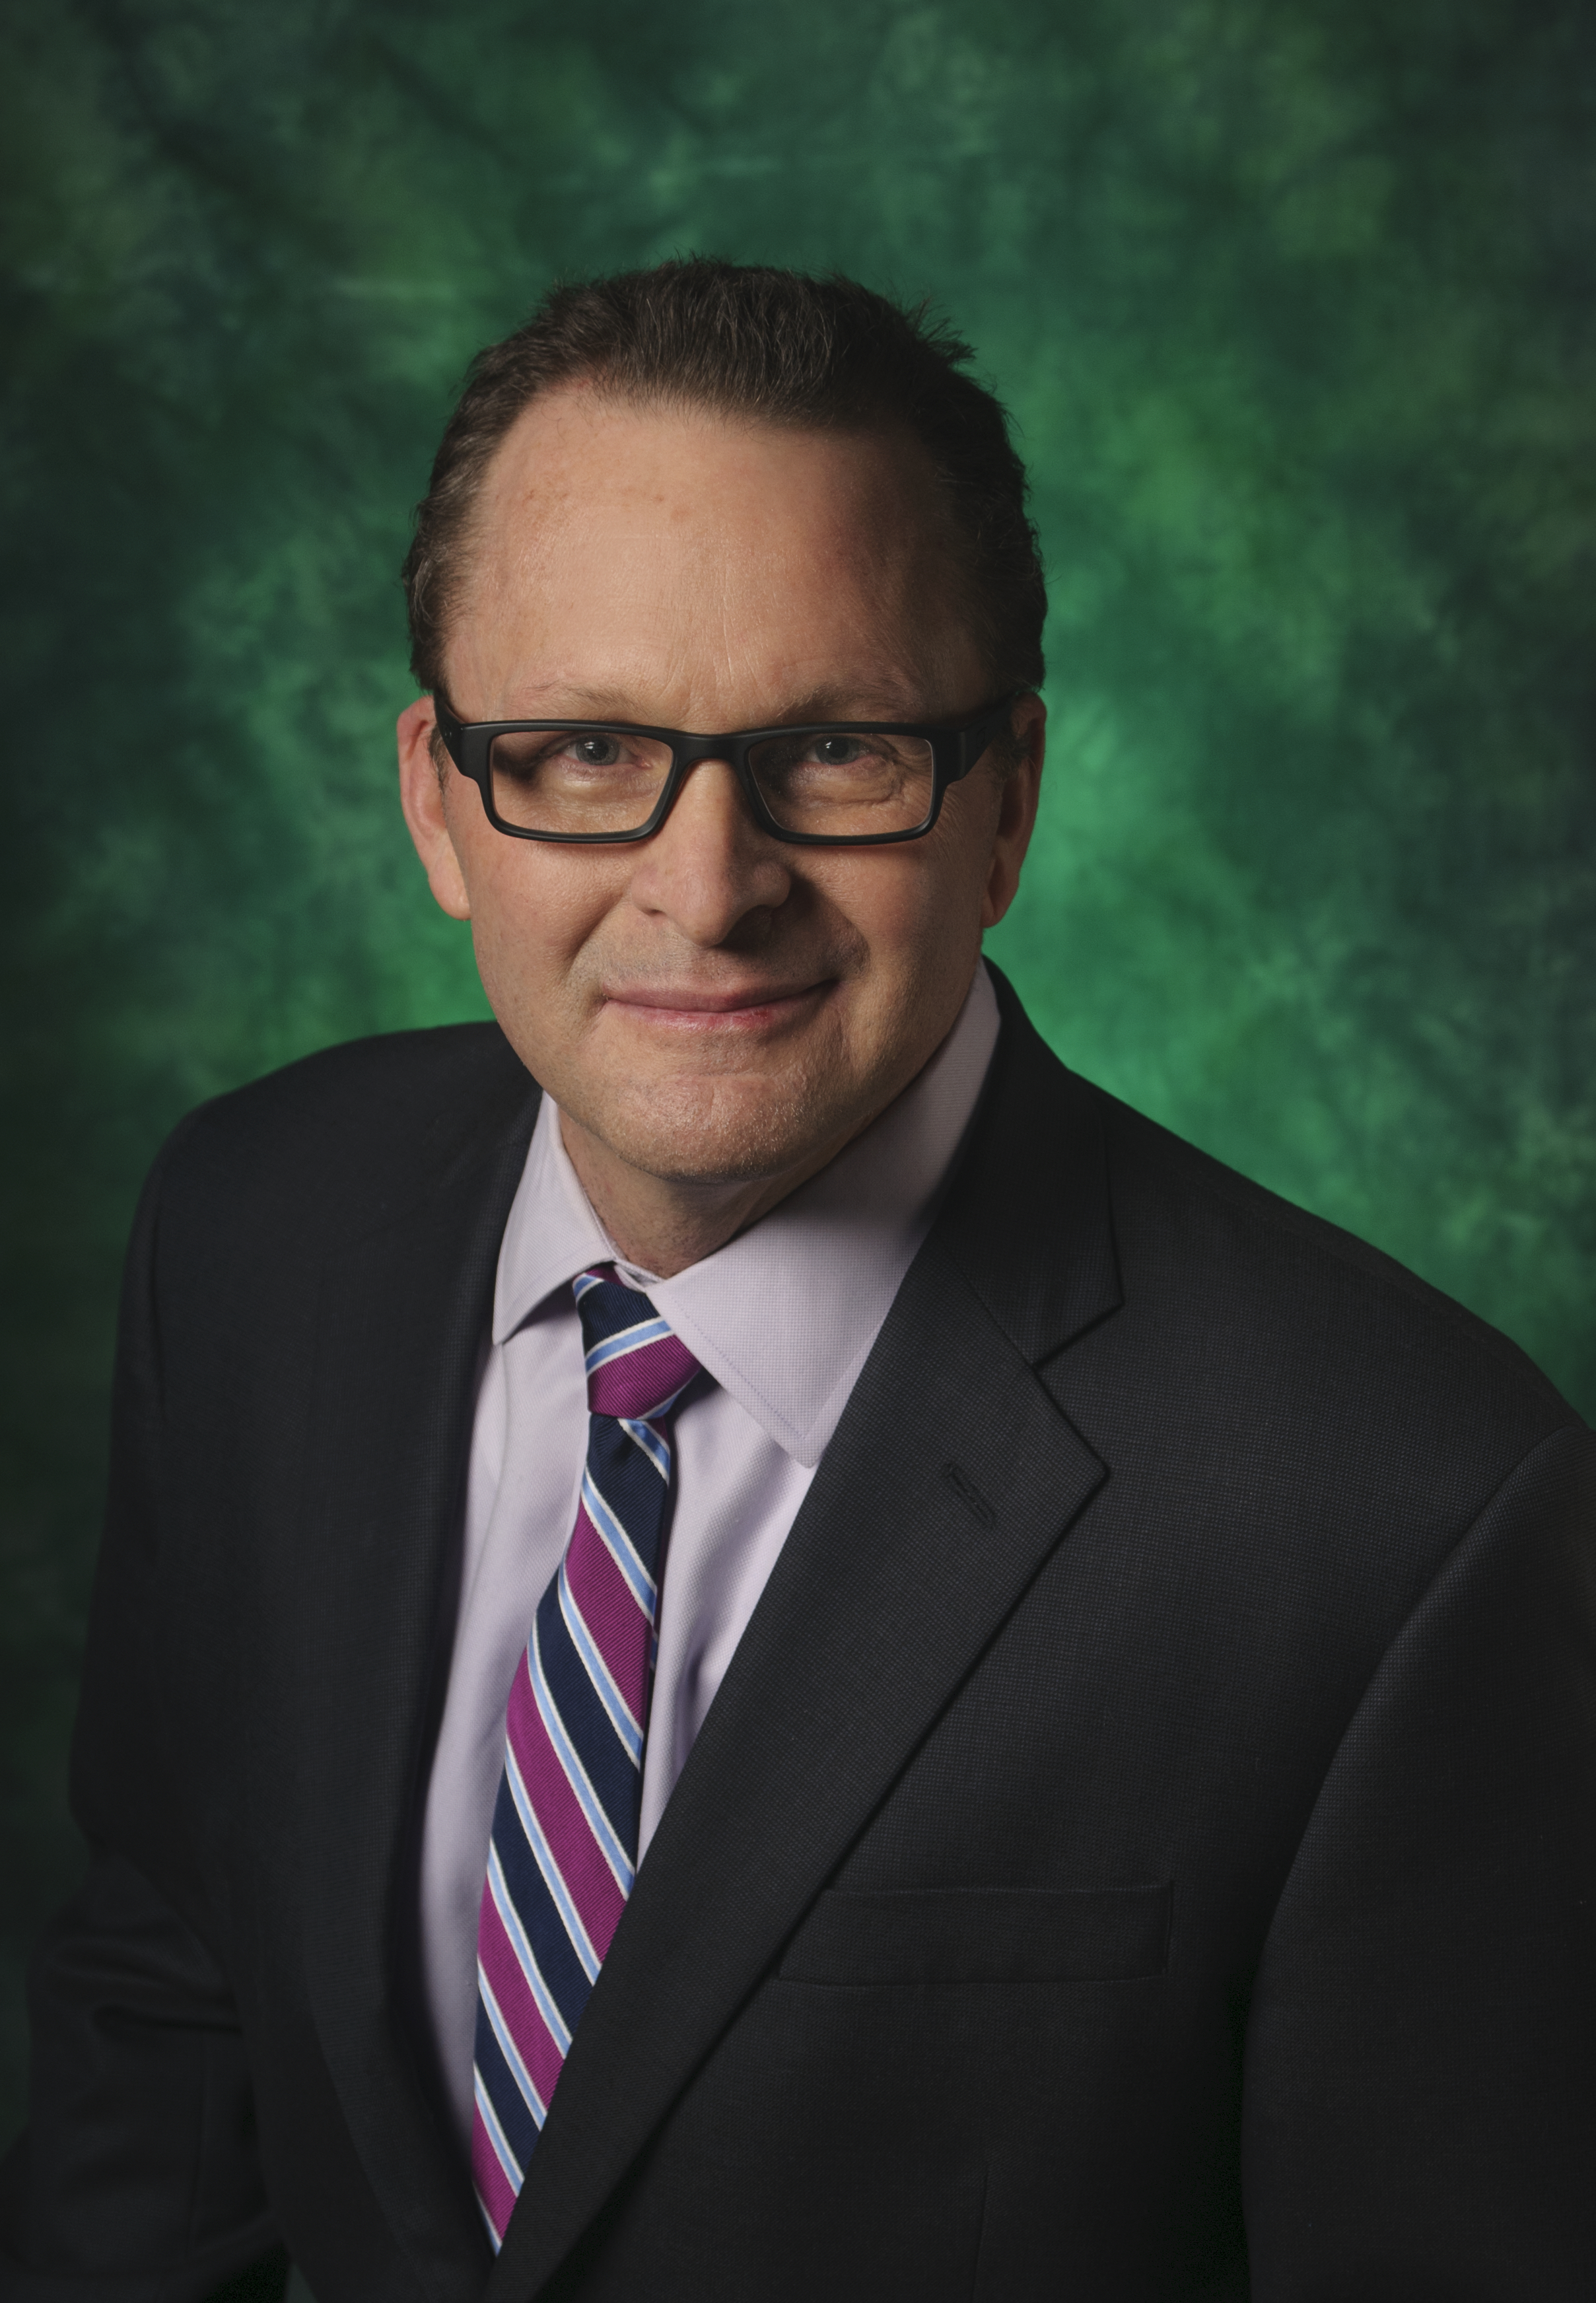 Wesley Randall, chair of UNT’s Department of Marketing, Logistics and Operations Management, who has 30 years of expertise in supply chain and logistics, has been named dean of the New College at Frisco in this March 2018 photo.

